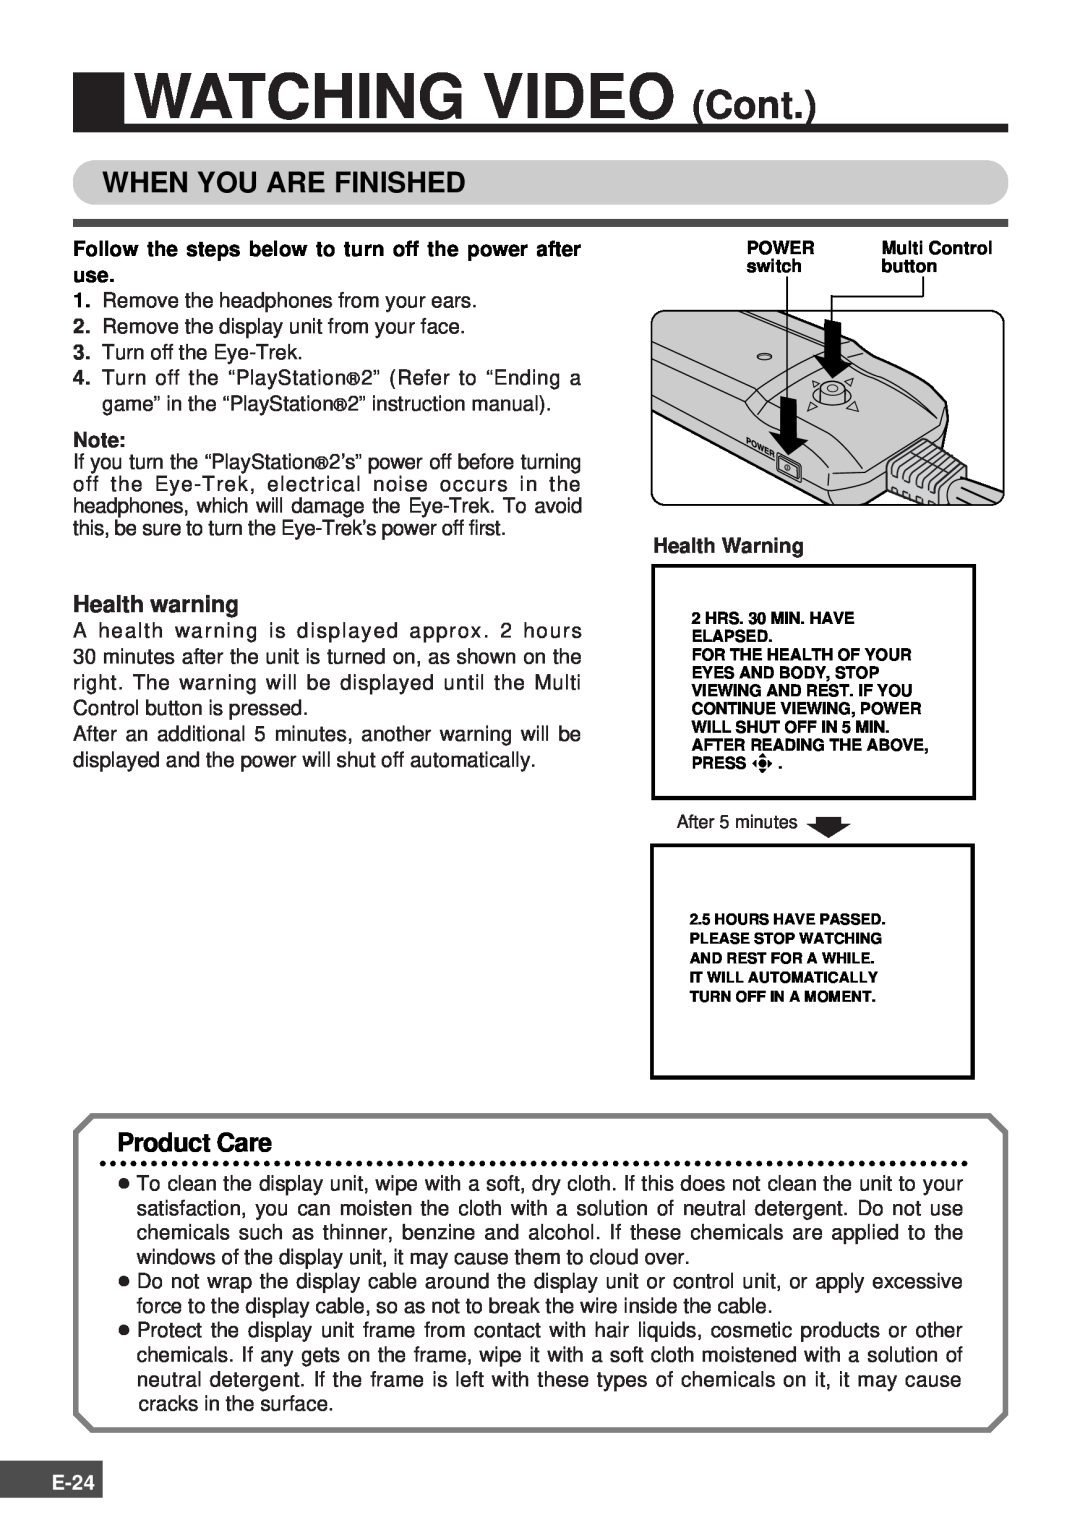 Olympus SCPH-10130U instruction manual WATCHING VIDEO Cont, When You Are Finished, Product Care, E-24 